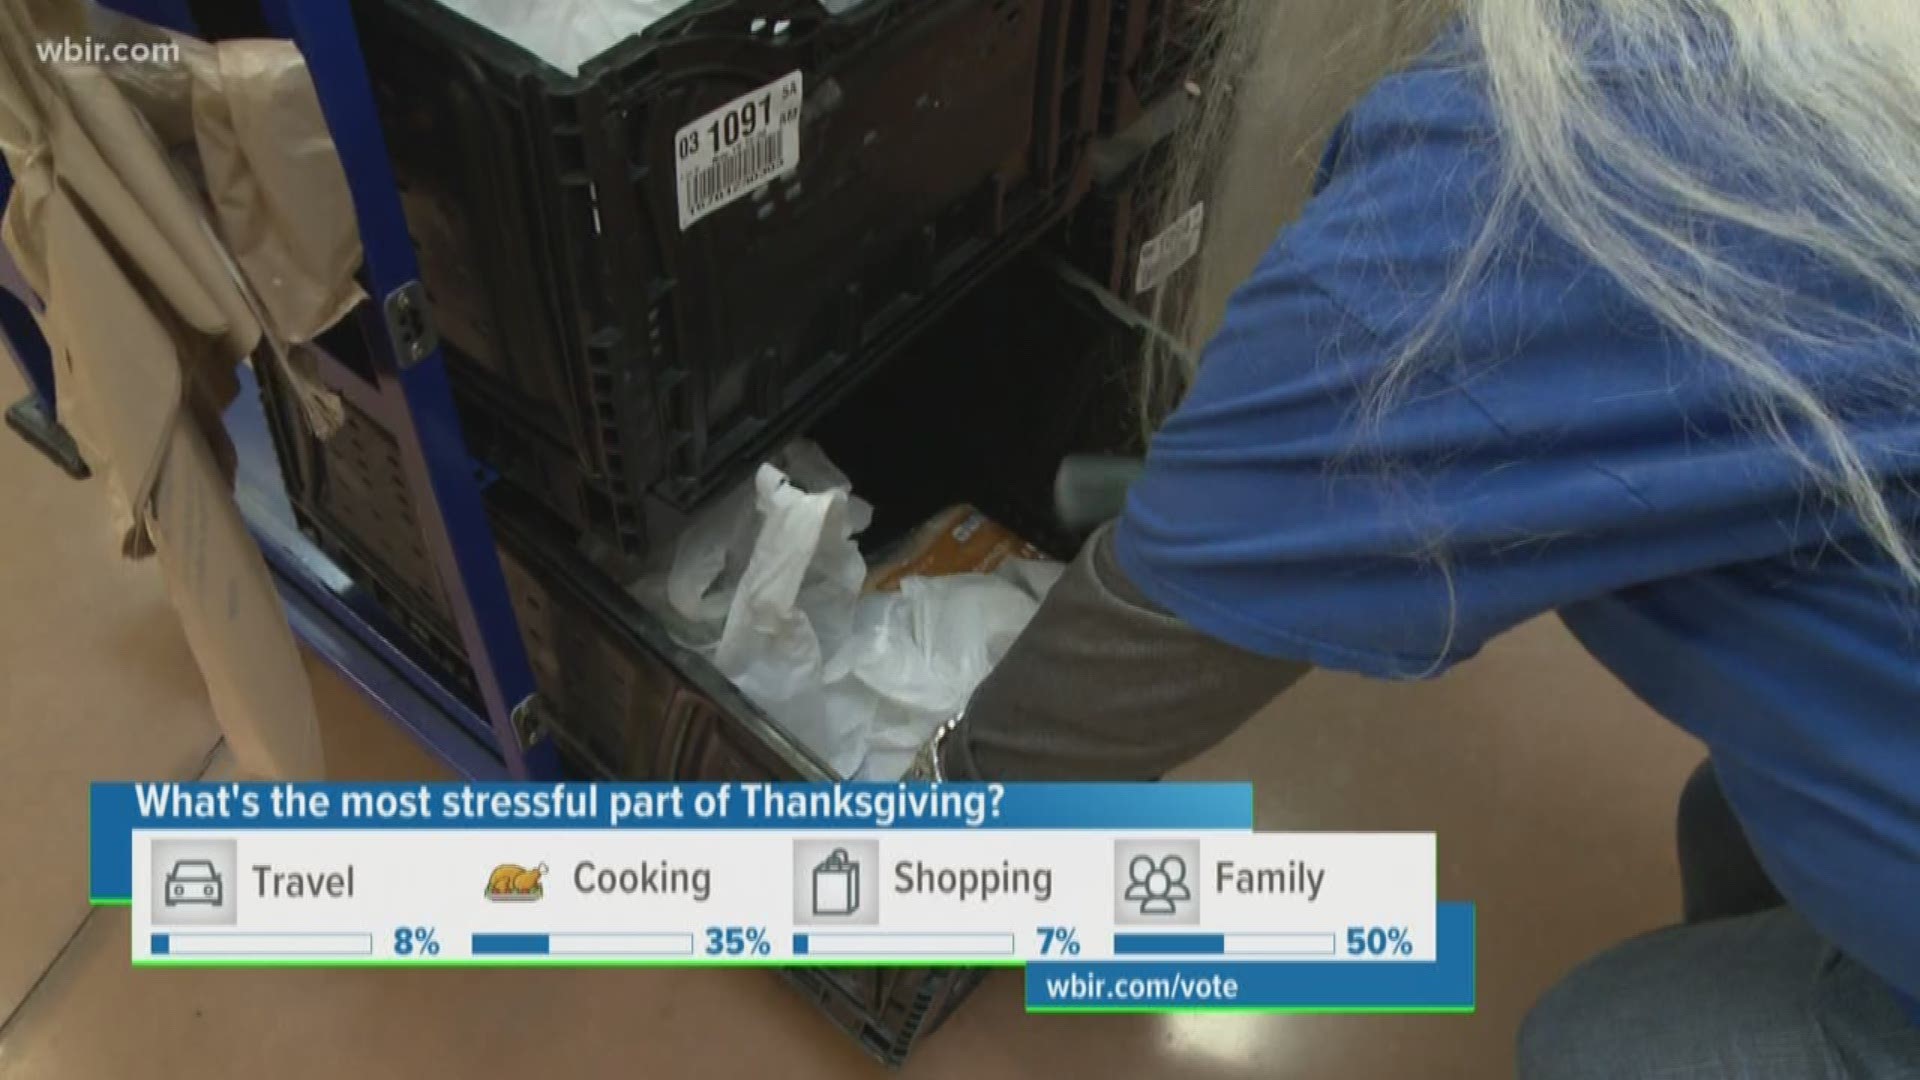 Experts say tomorrow, the Tuesday before Thanksgiving, is the busiest shopping day.